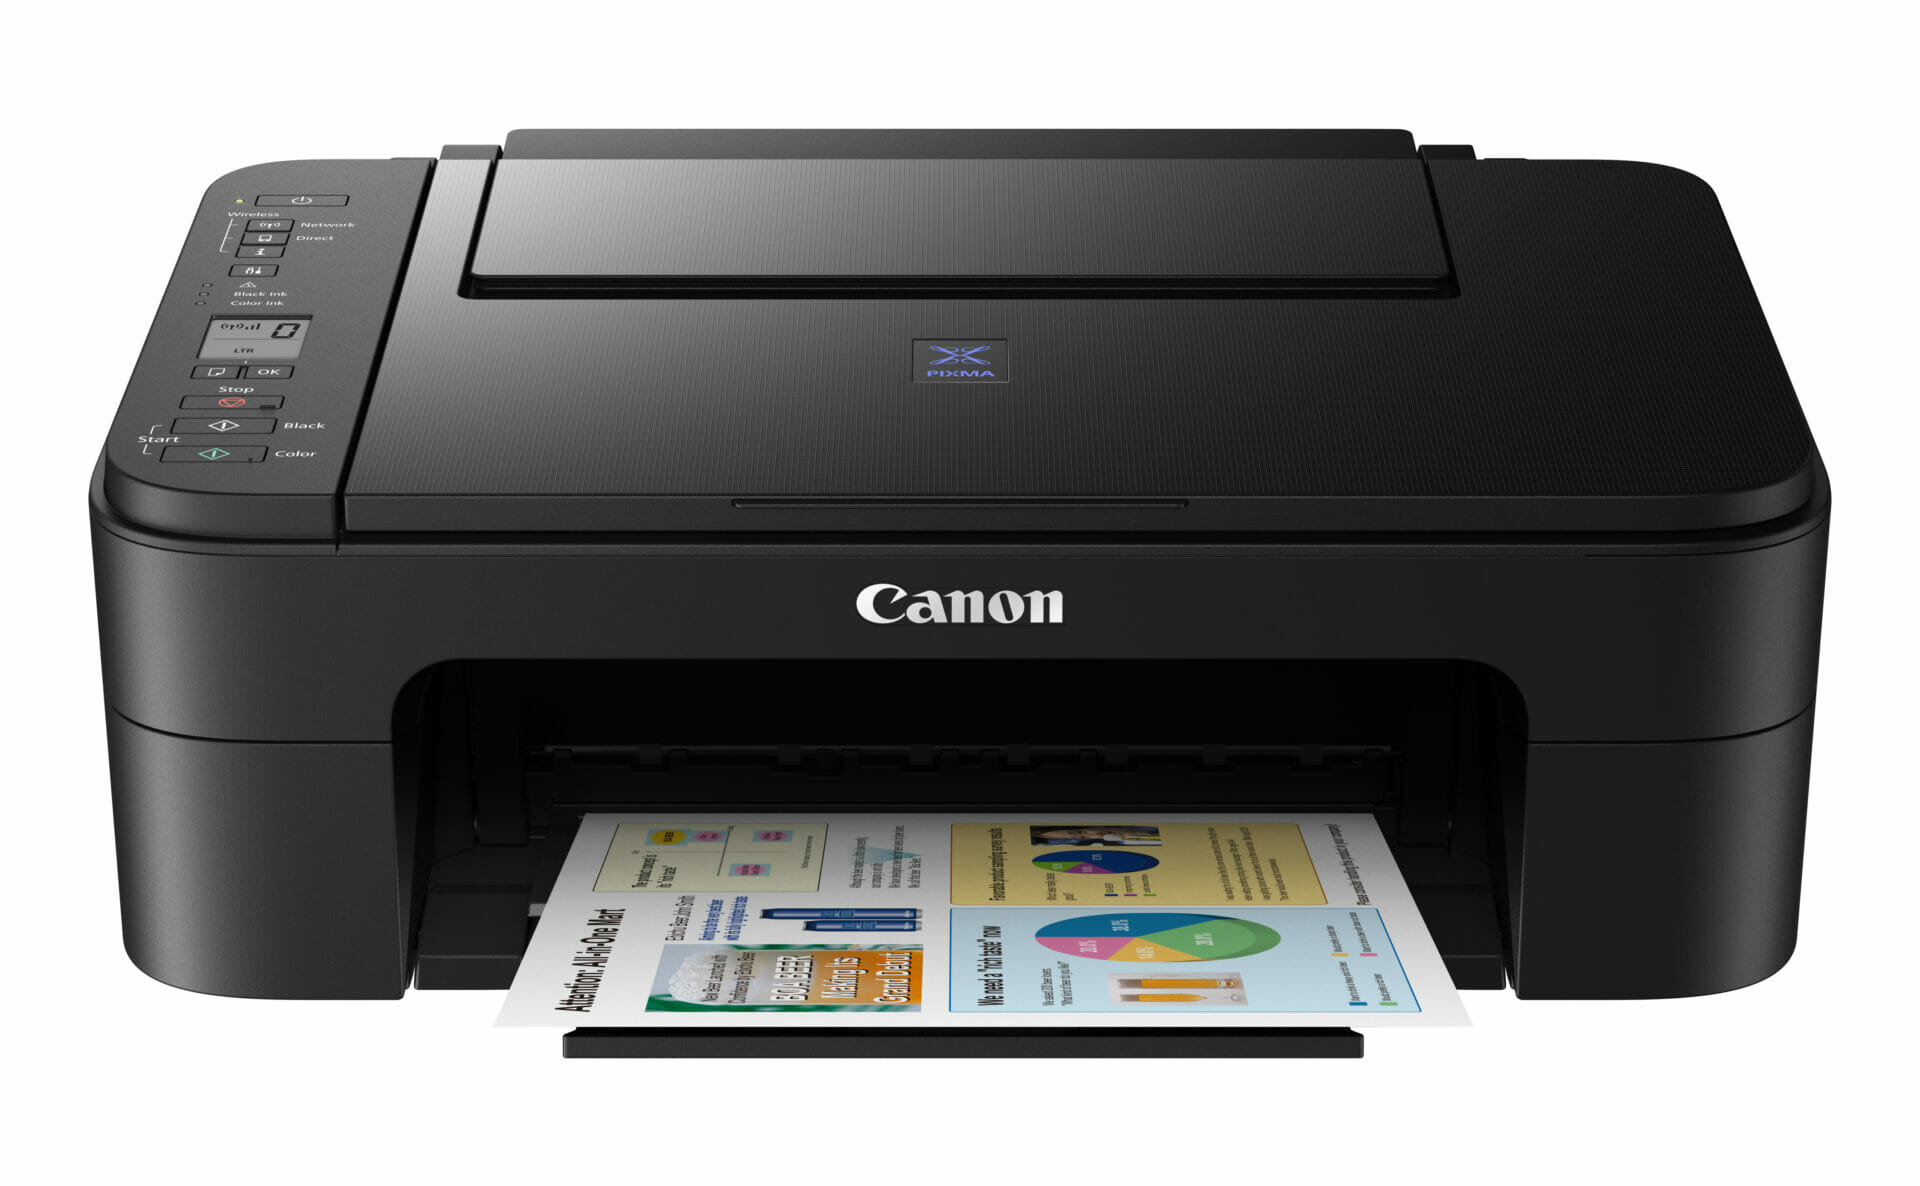 datum Idioot Fascinerend How to Change Ink in Canon Printer | The WiredShopper